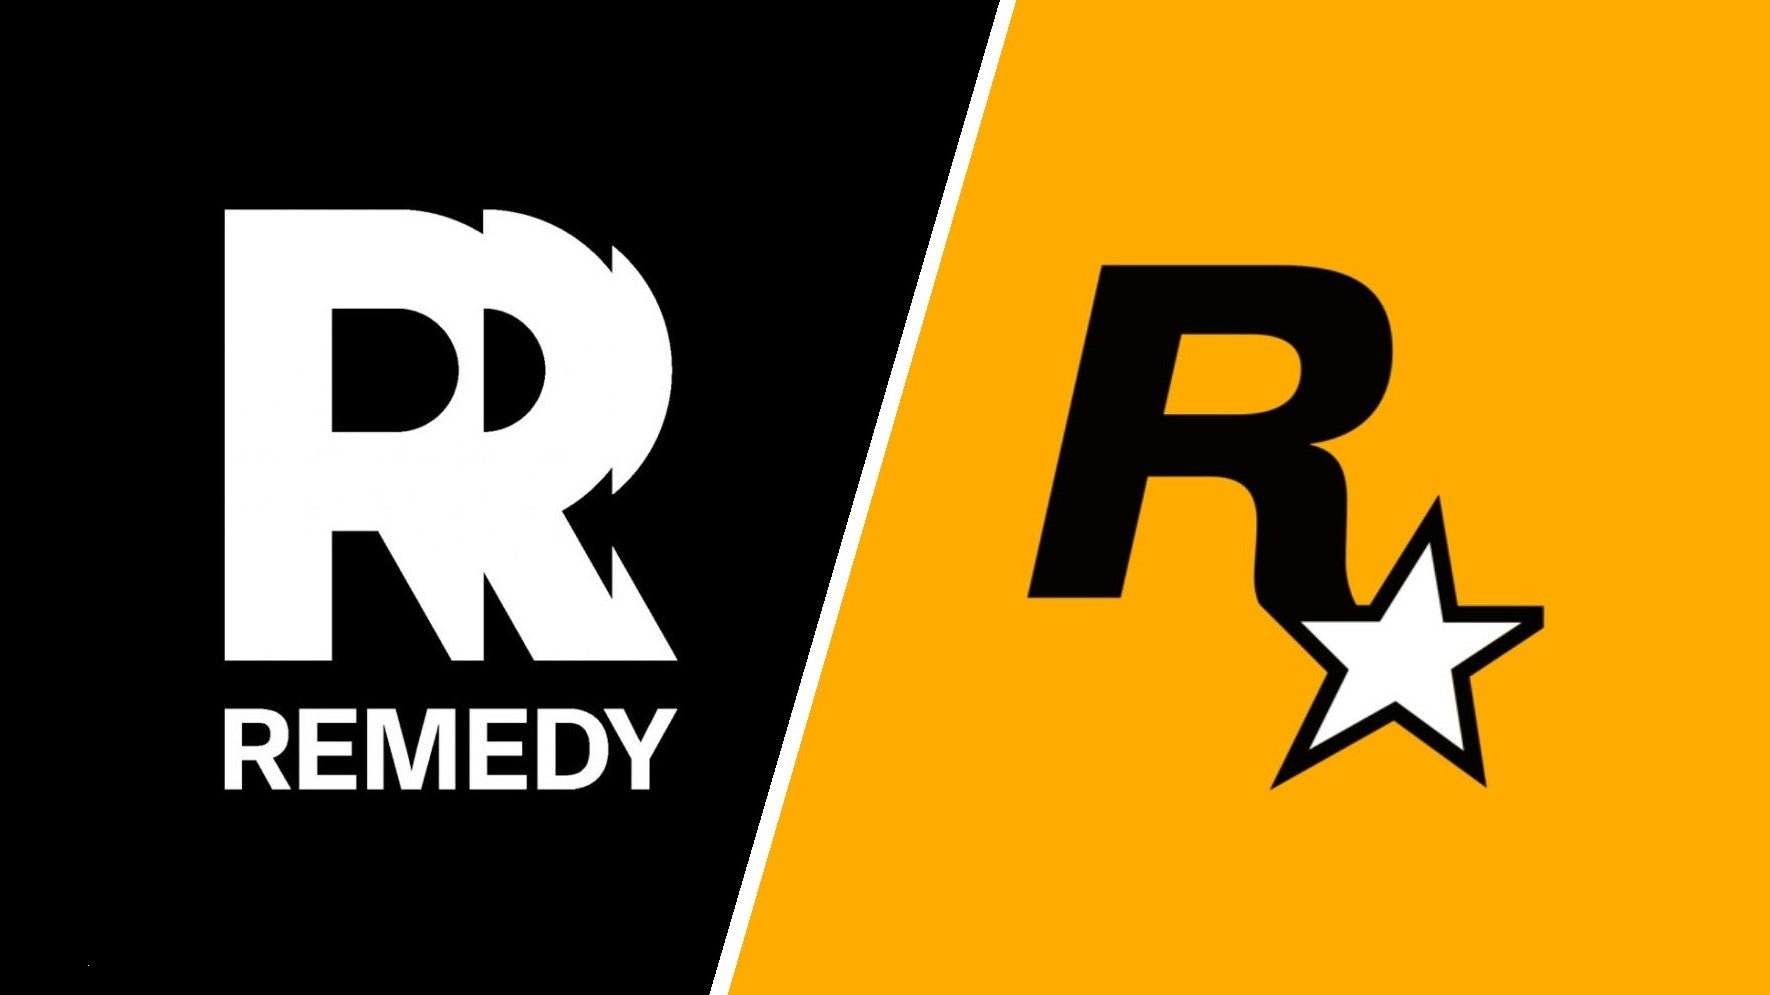 R stands for Registered Trademark: Take-Two vs Remedy